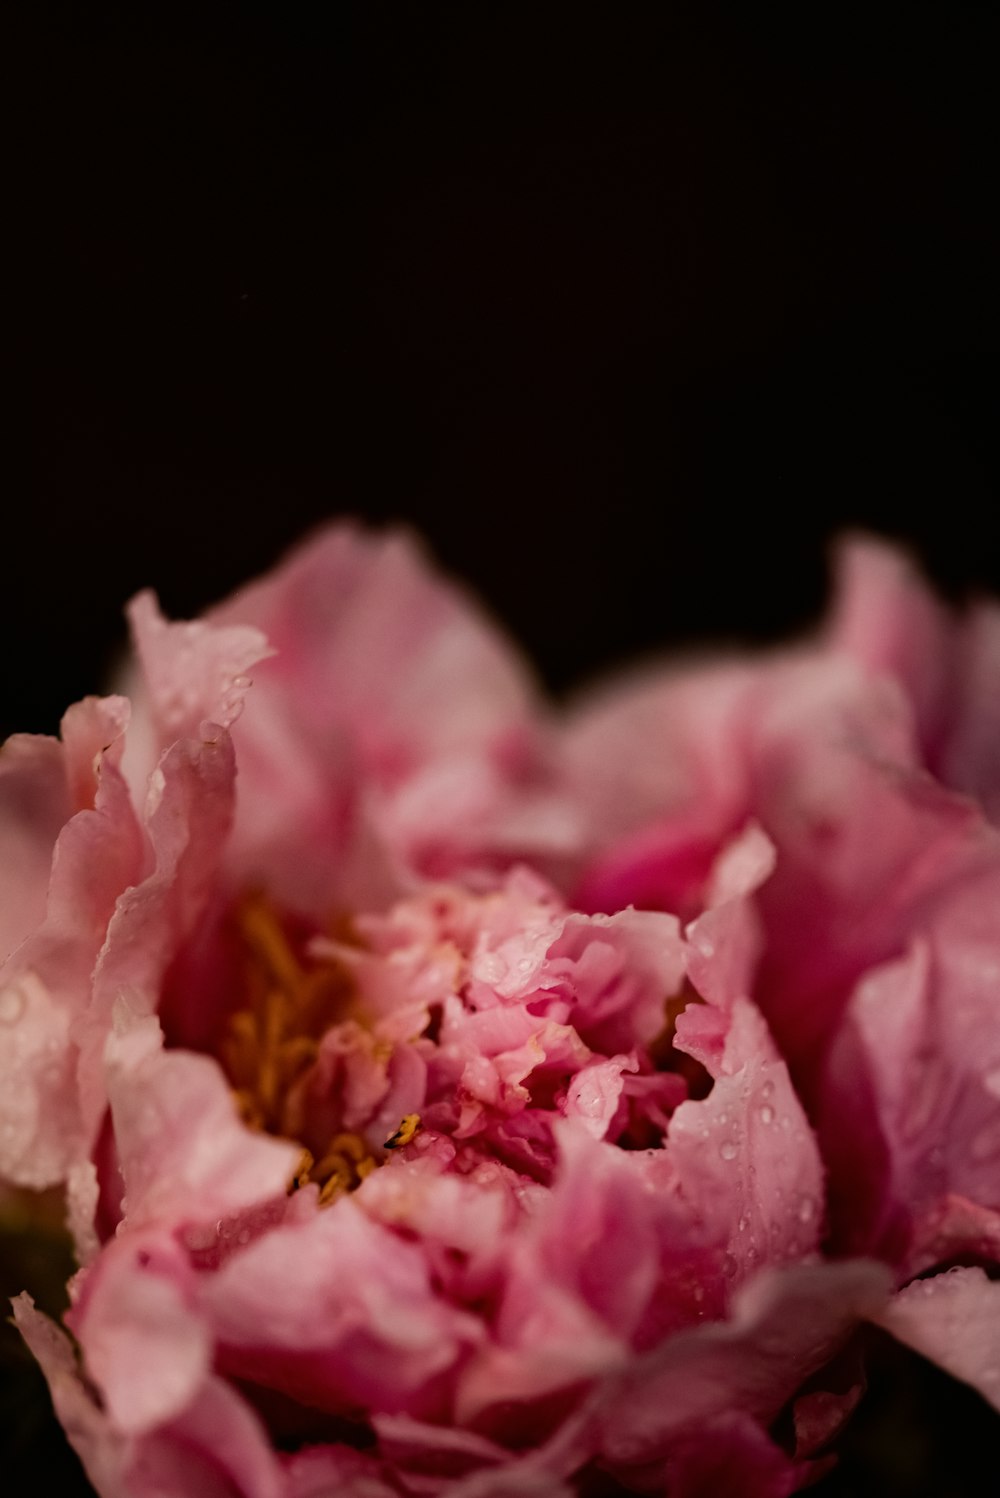 a close up of pink flowers